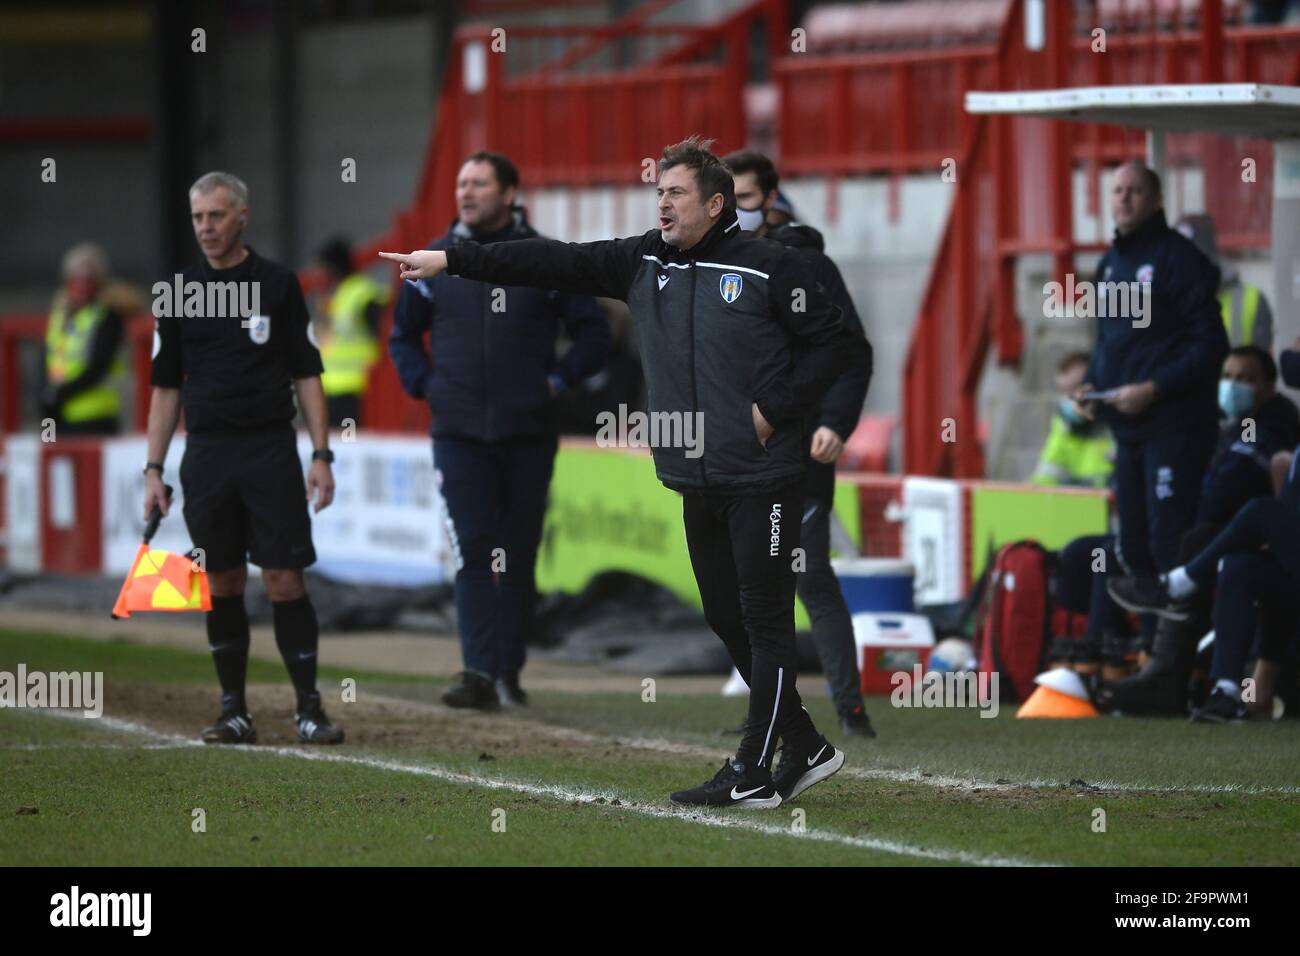 Colchester United Manager Steve ball - Crawley Town / Colchester United, Sky Bet League Two, The People's Pension Stadium, Crawley, Royaume-Uni - 20 février 2020 usage éditorial uniquement - restrictions DataCo applicables Banque D'Images